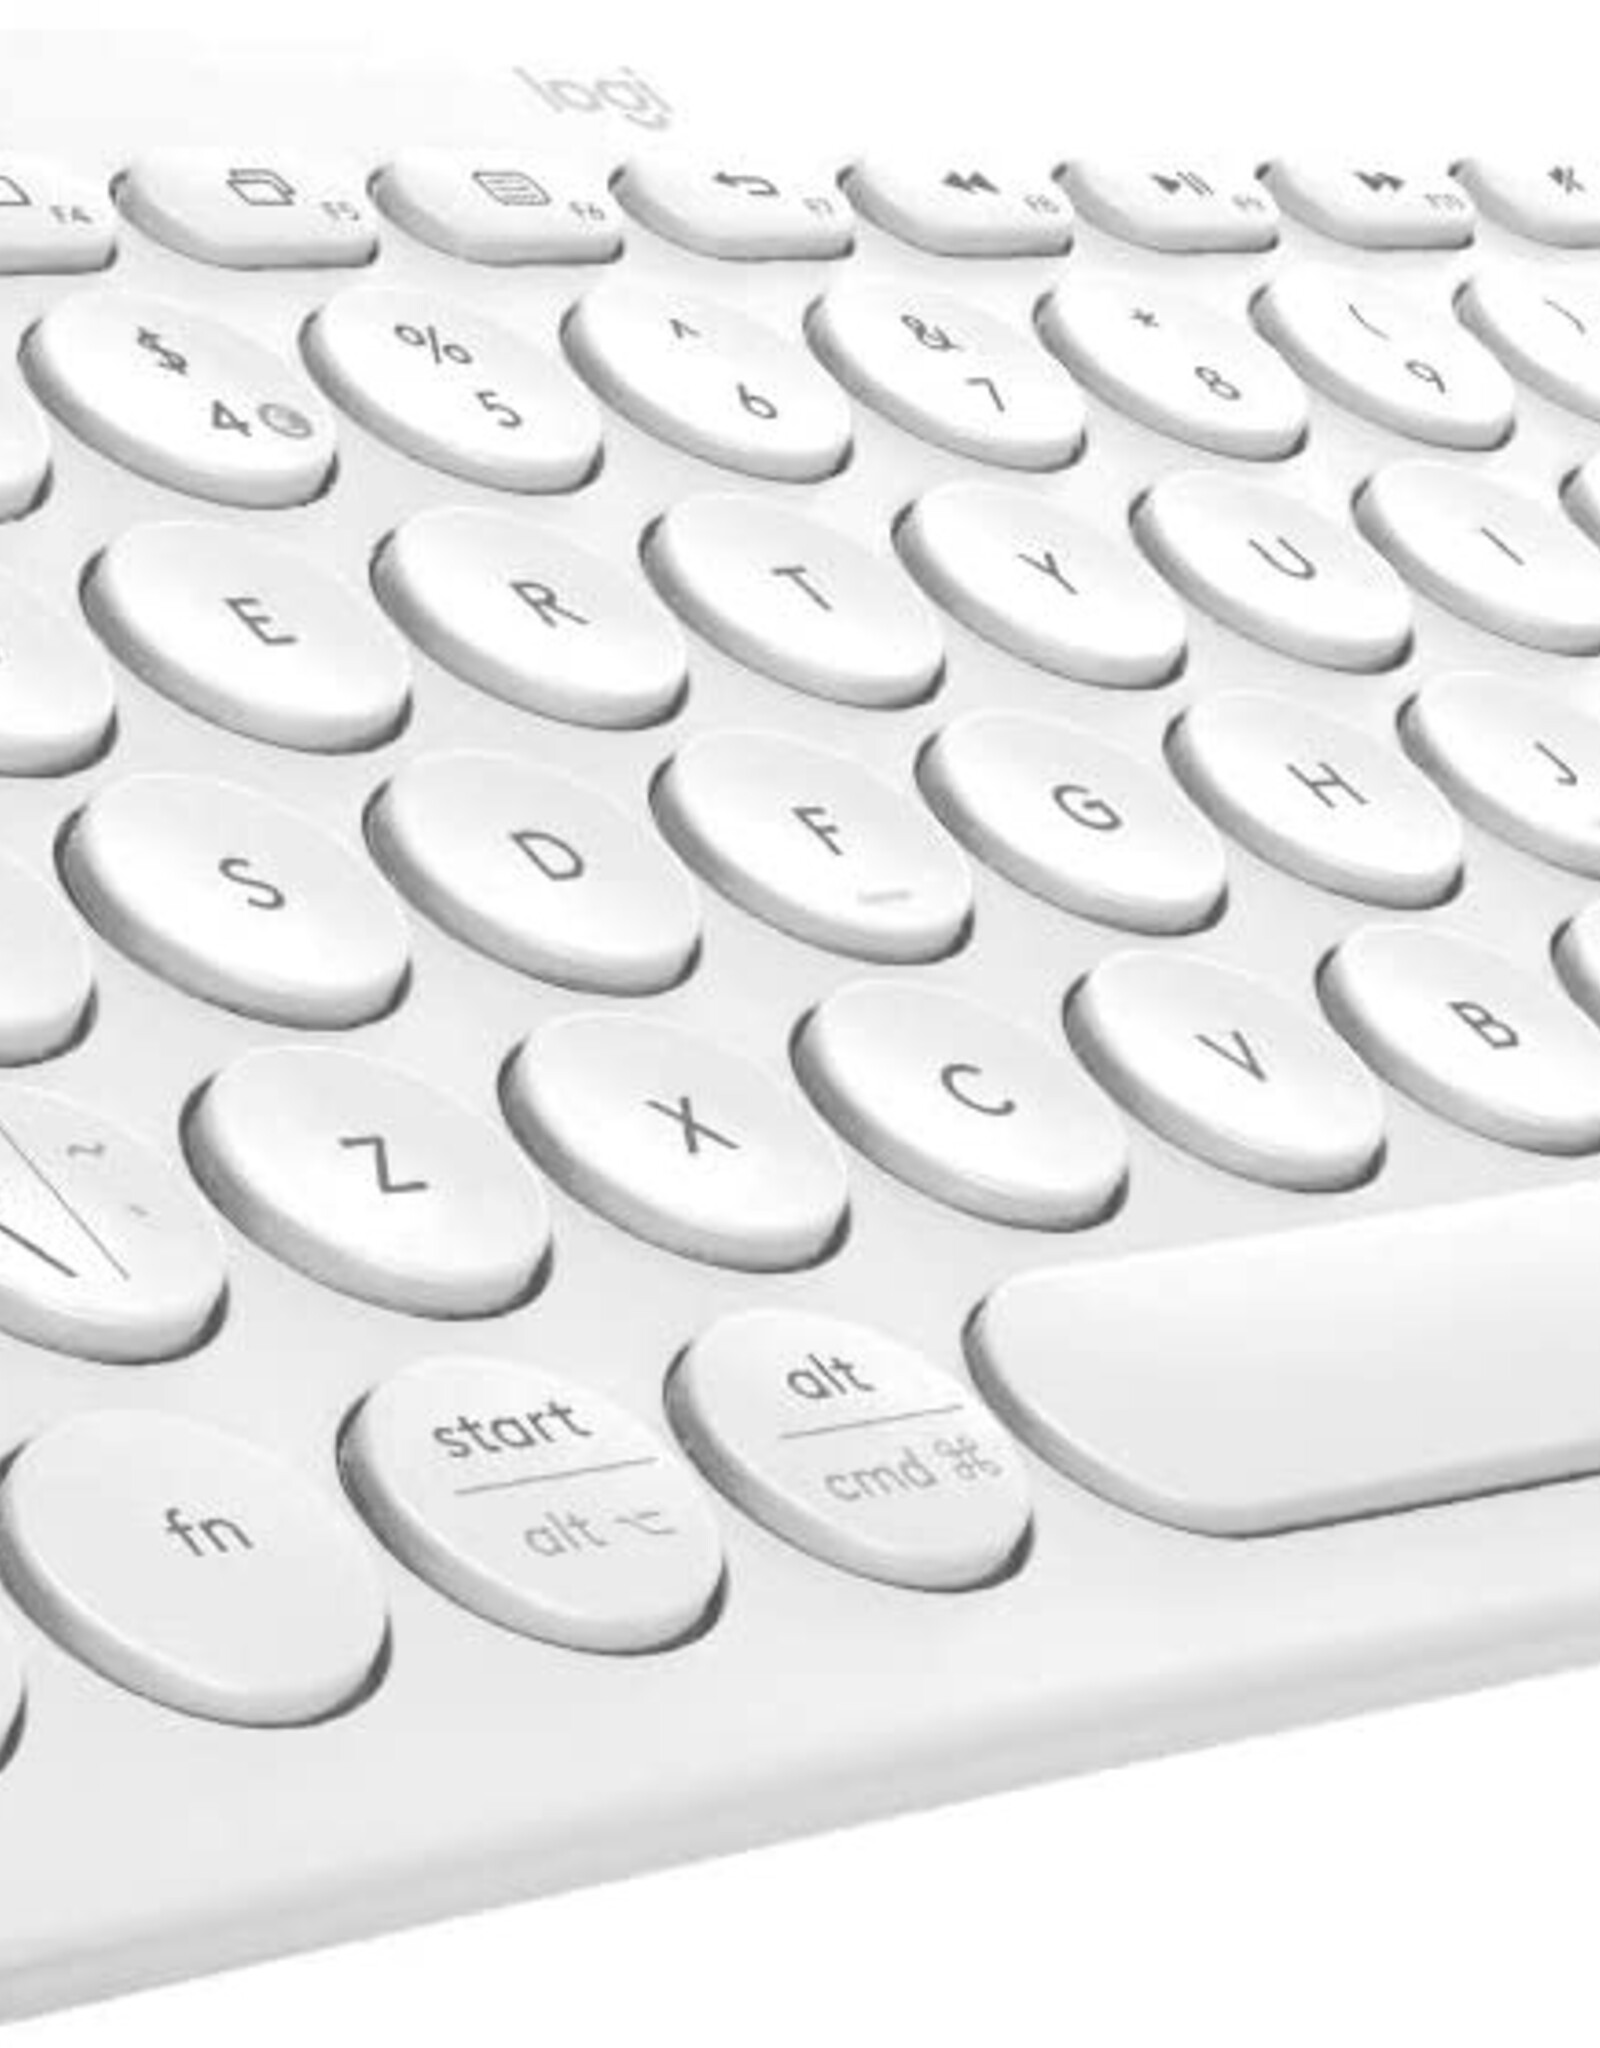 Logitech K380 Multi-Device Bluetooth Keyboard – Windows, Mac, Chrome OS, Android, iPad, iPhone, Apple TV Compatible – with Flow Cross-Computer Control and Easy-Switch up to 3 Devices